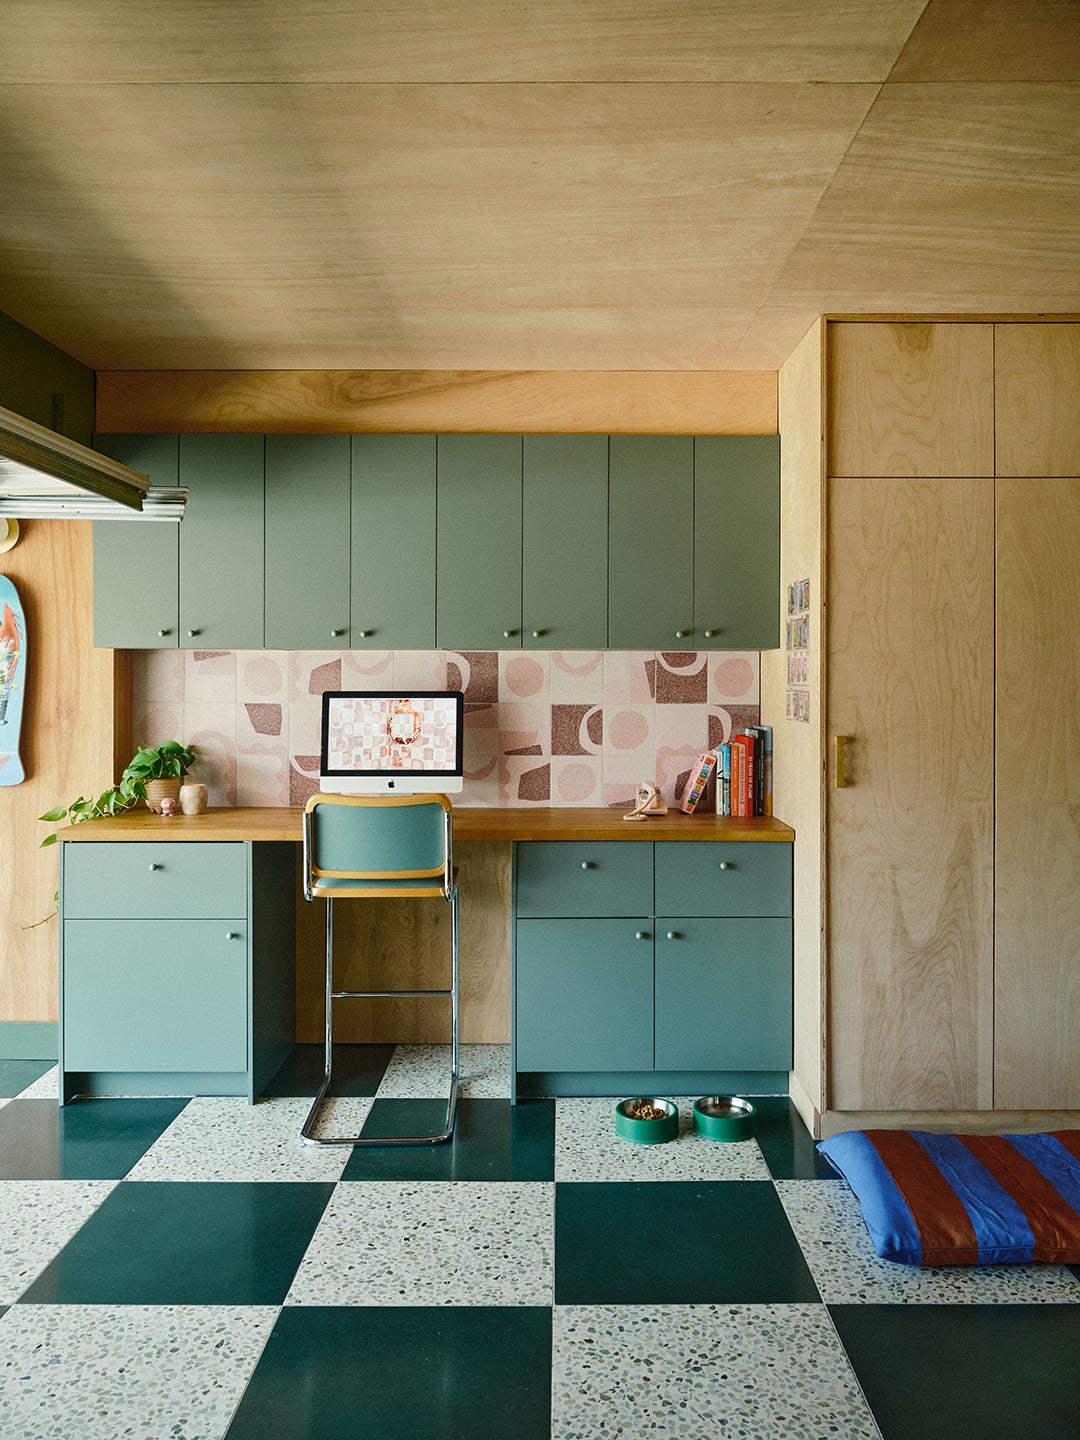 Green cabinets with a built-in desk